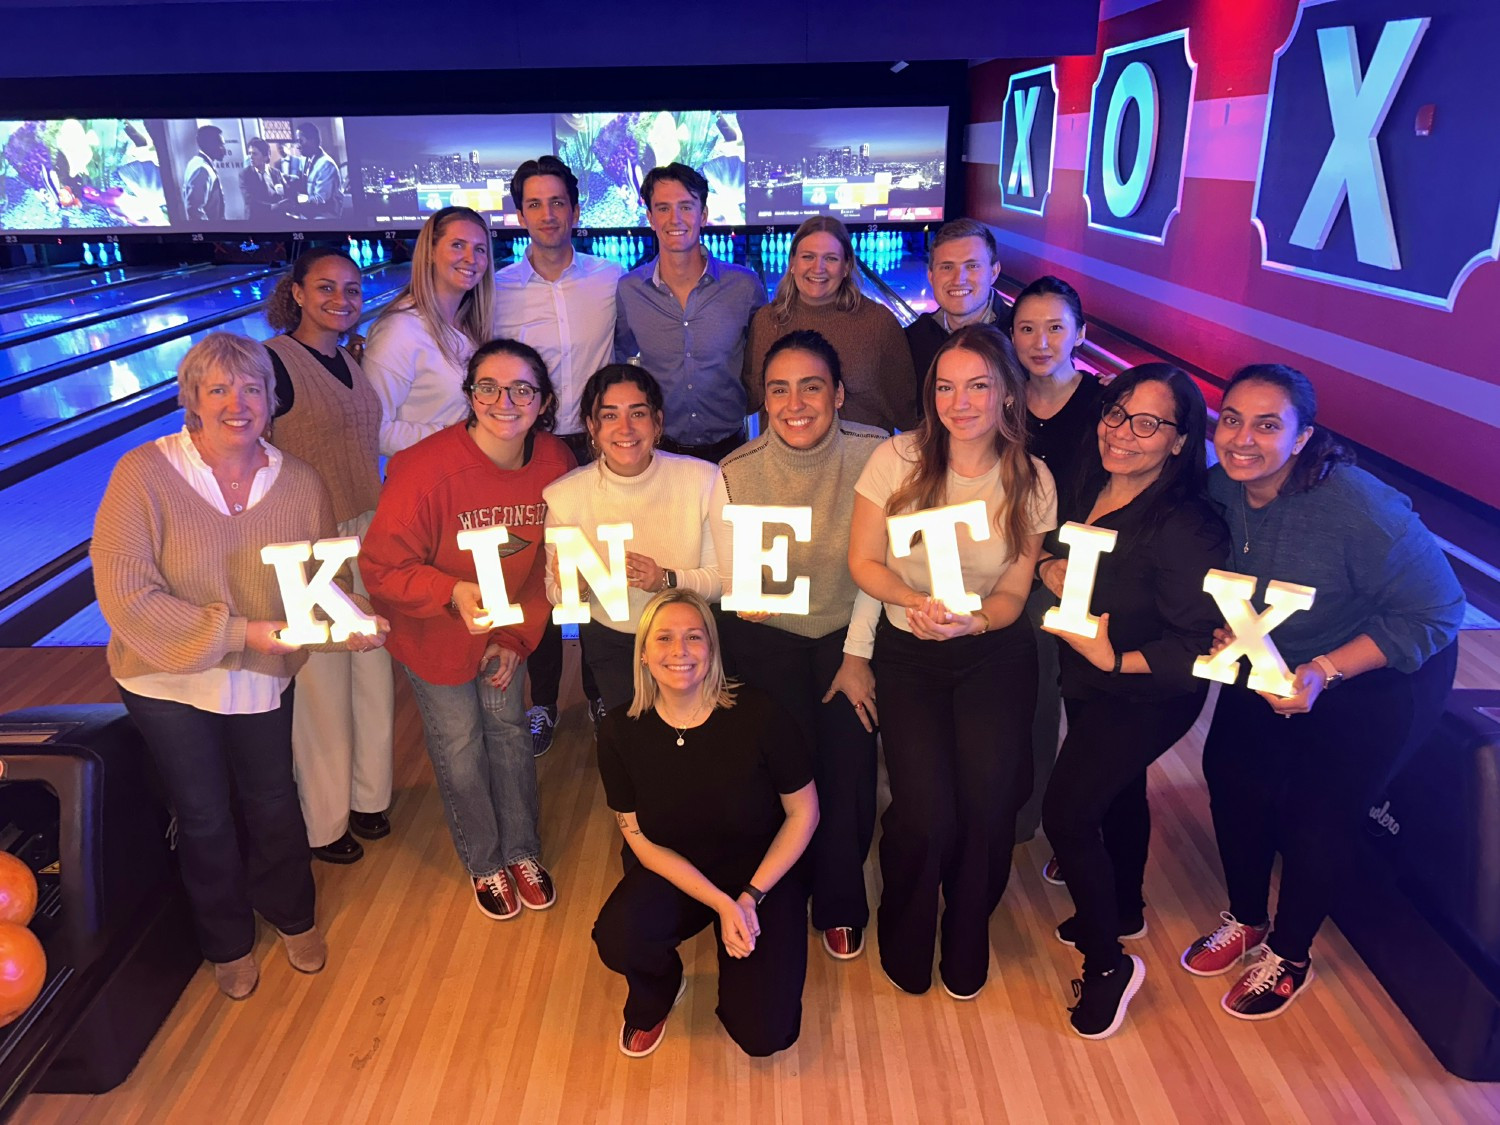 TKG colleagues enjoy a night out bowling.